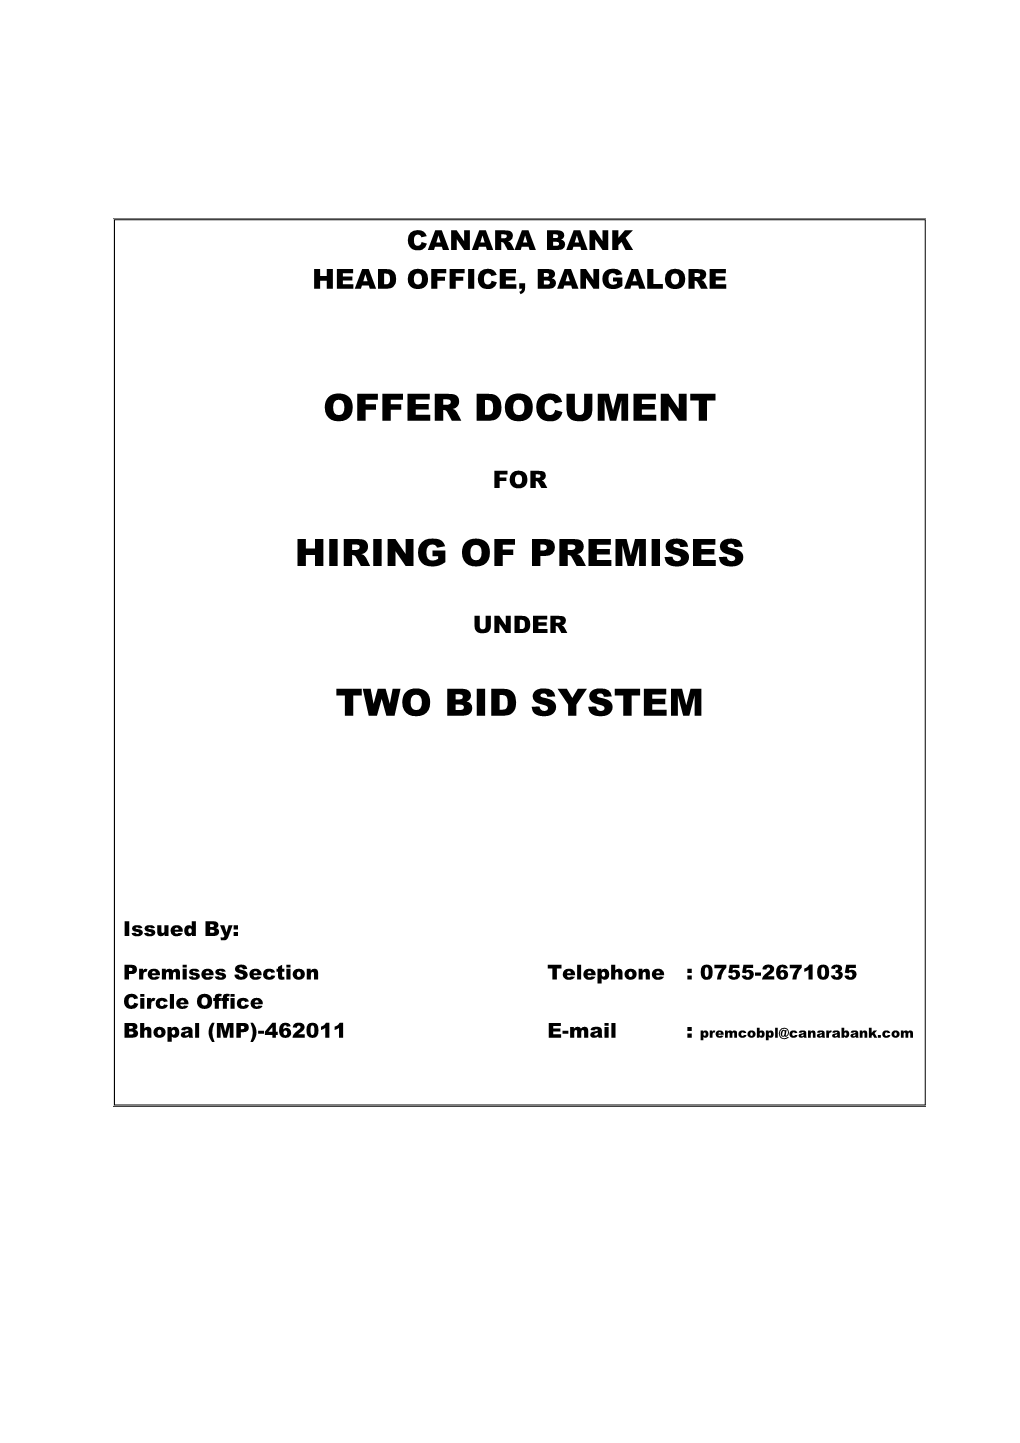 Offer Document Inviting Offers in Two-Bid System for Hiring Premises s1